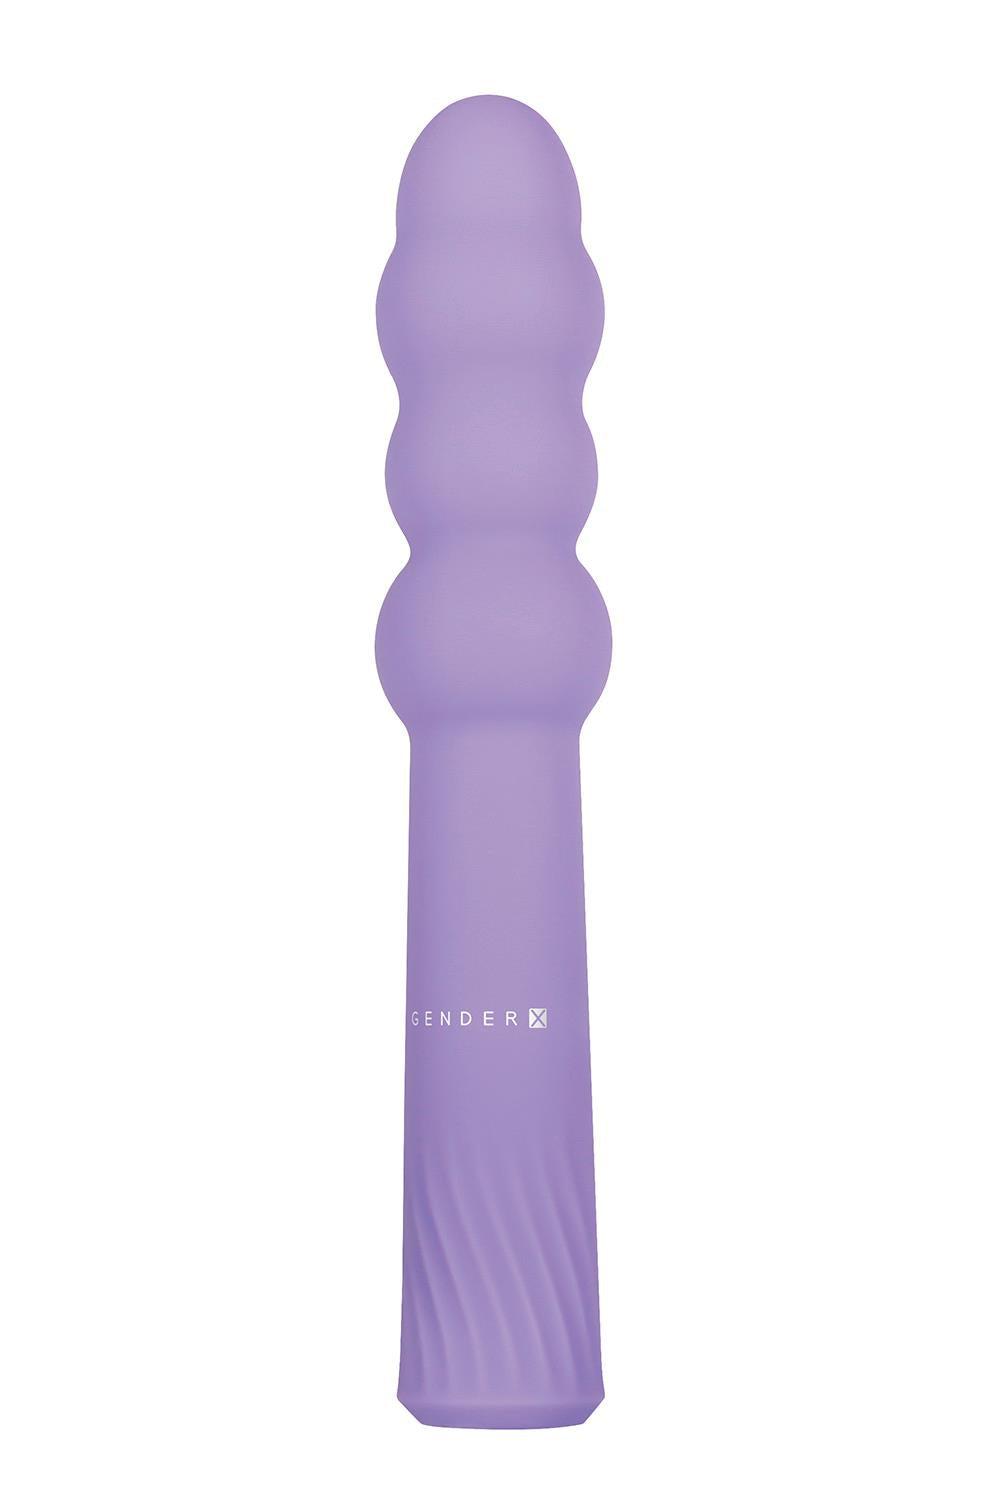 Gender X Bumpy Ride – Adult Sex Toys, Intimate Supplies, Sexual Wellness, Online Sex Store picture